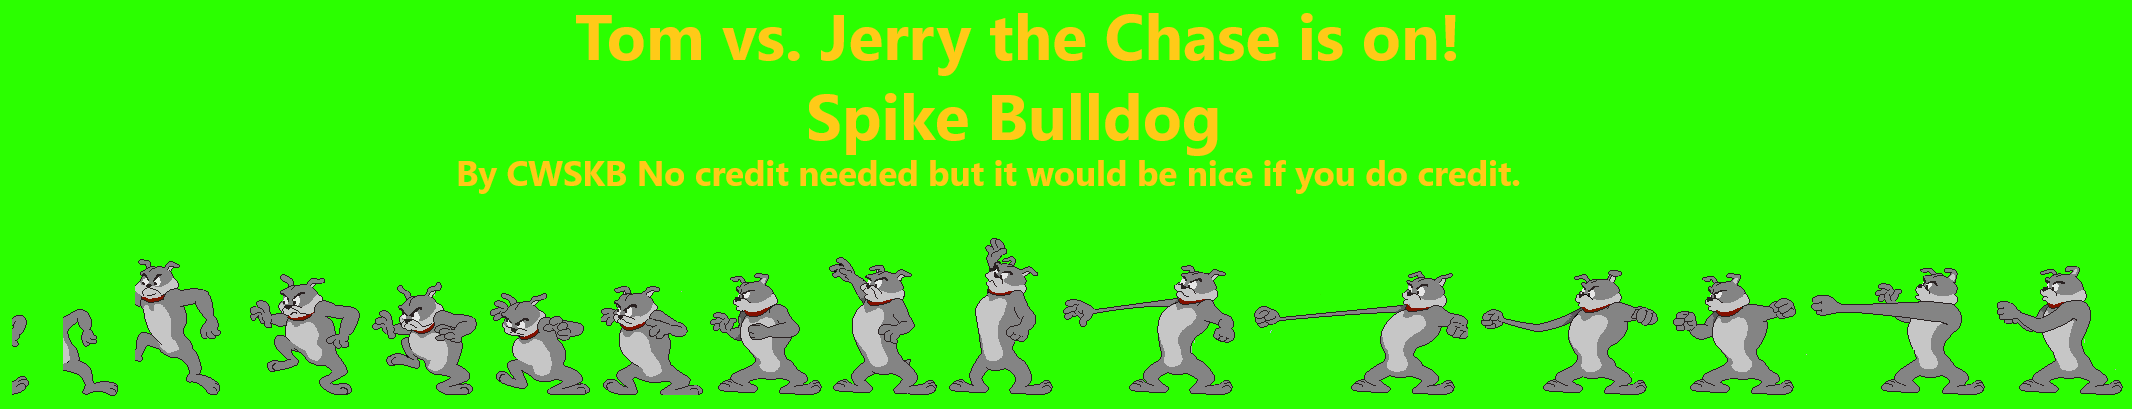 Tom VS. Jerry: The Chase Is On! (Prototype) - Spike Bulldog